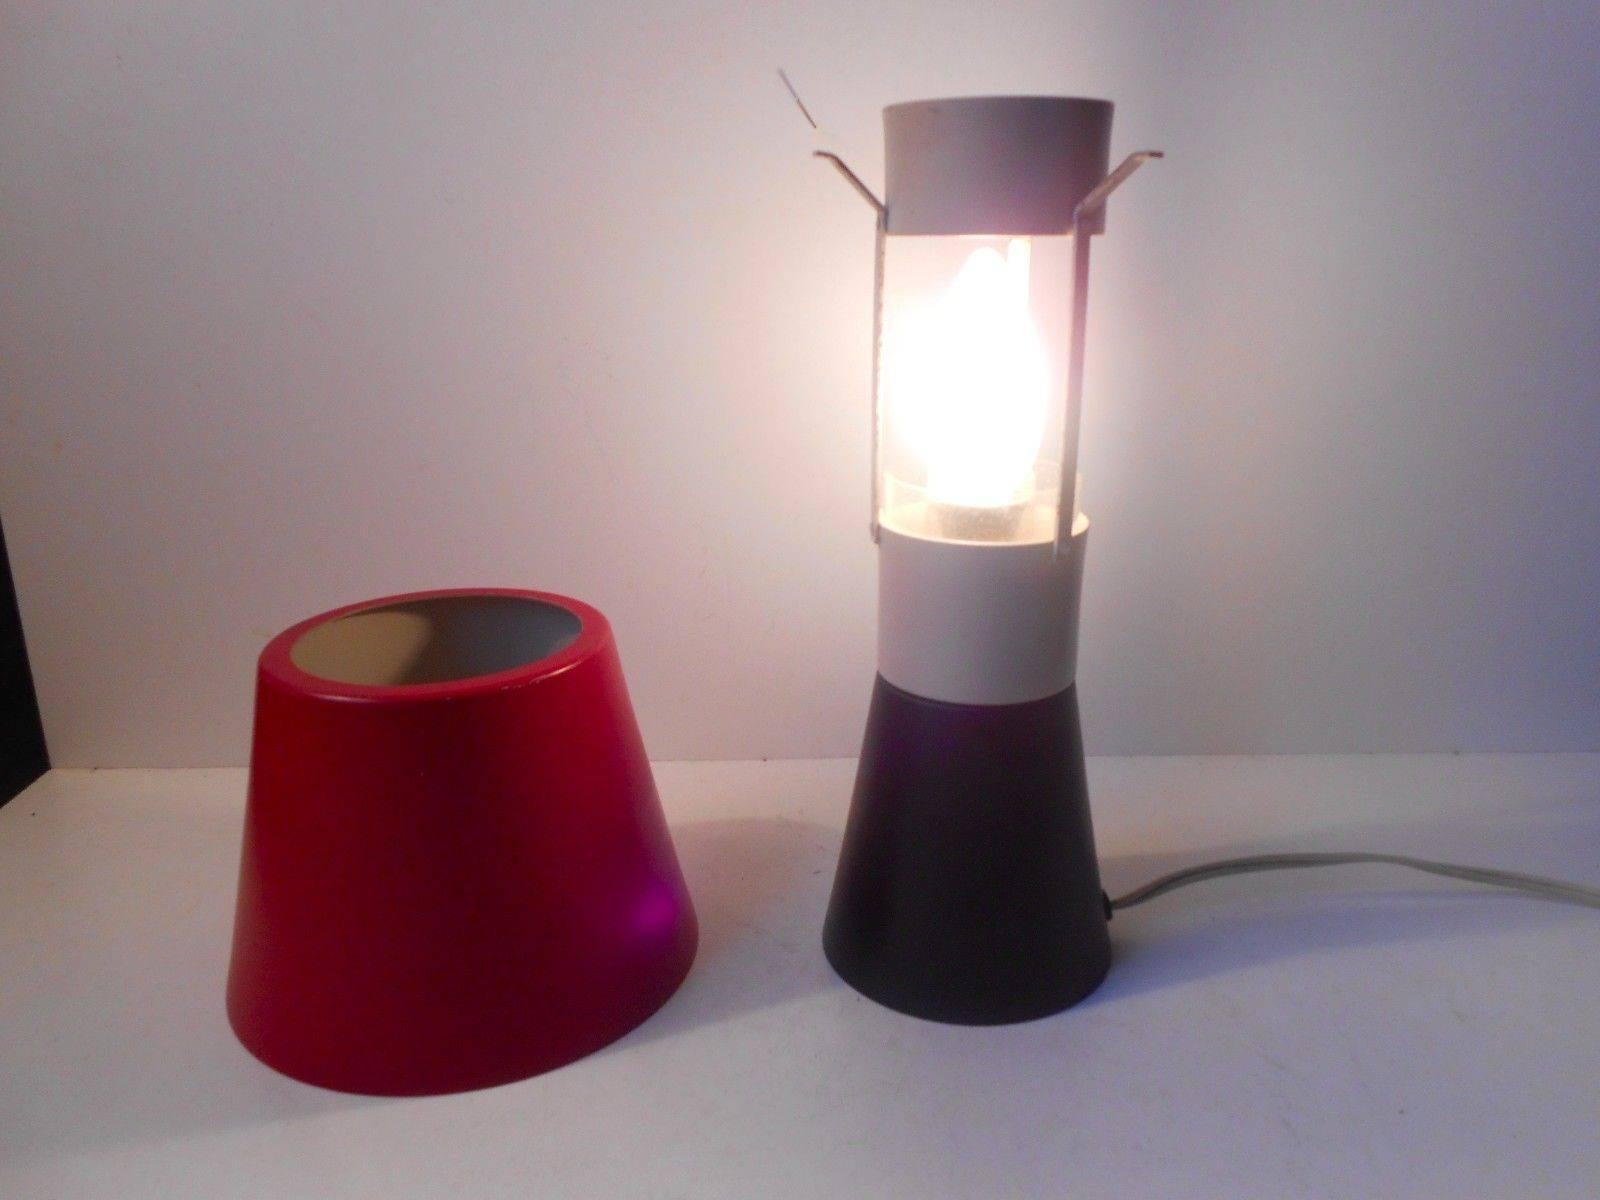 Powder-Coated Rare Tri-color Modernist Table Lamp by Ernest Voss, Denmark, 1950s For Sale